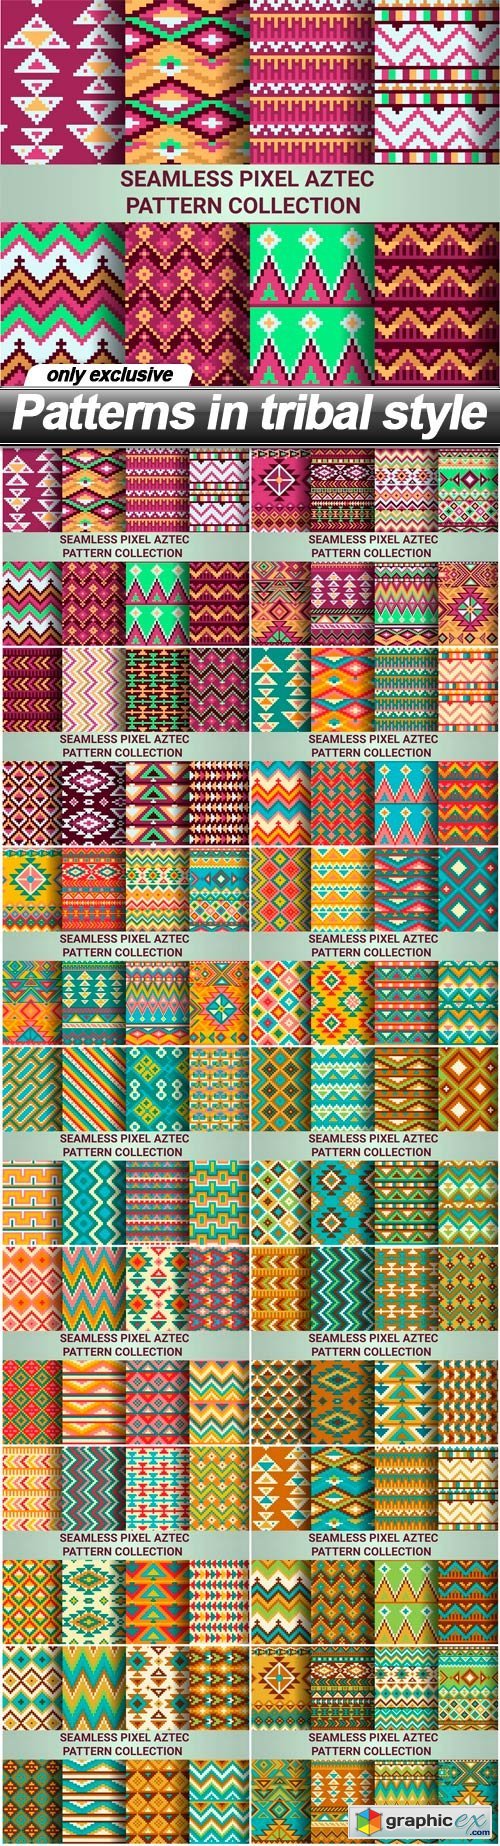 Patterns in tribal style - 14 EPS